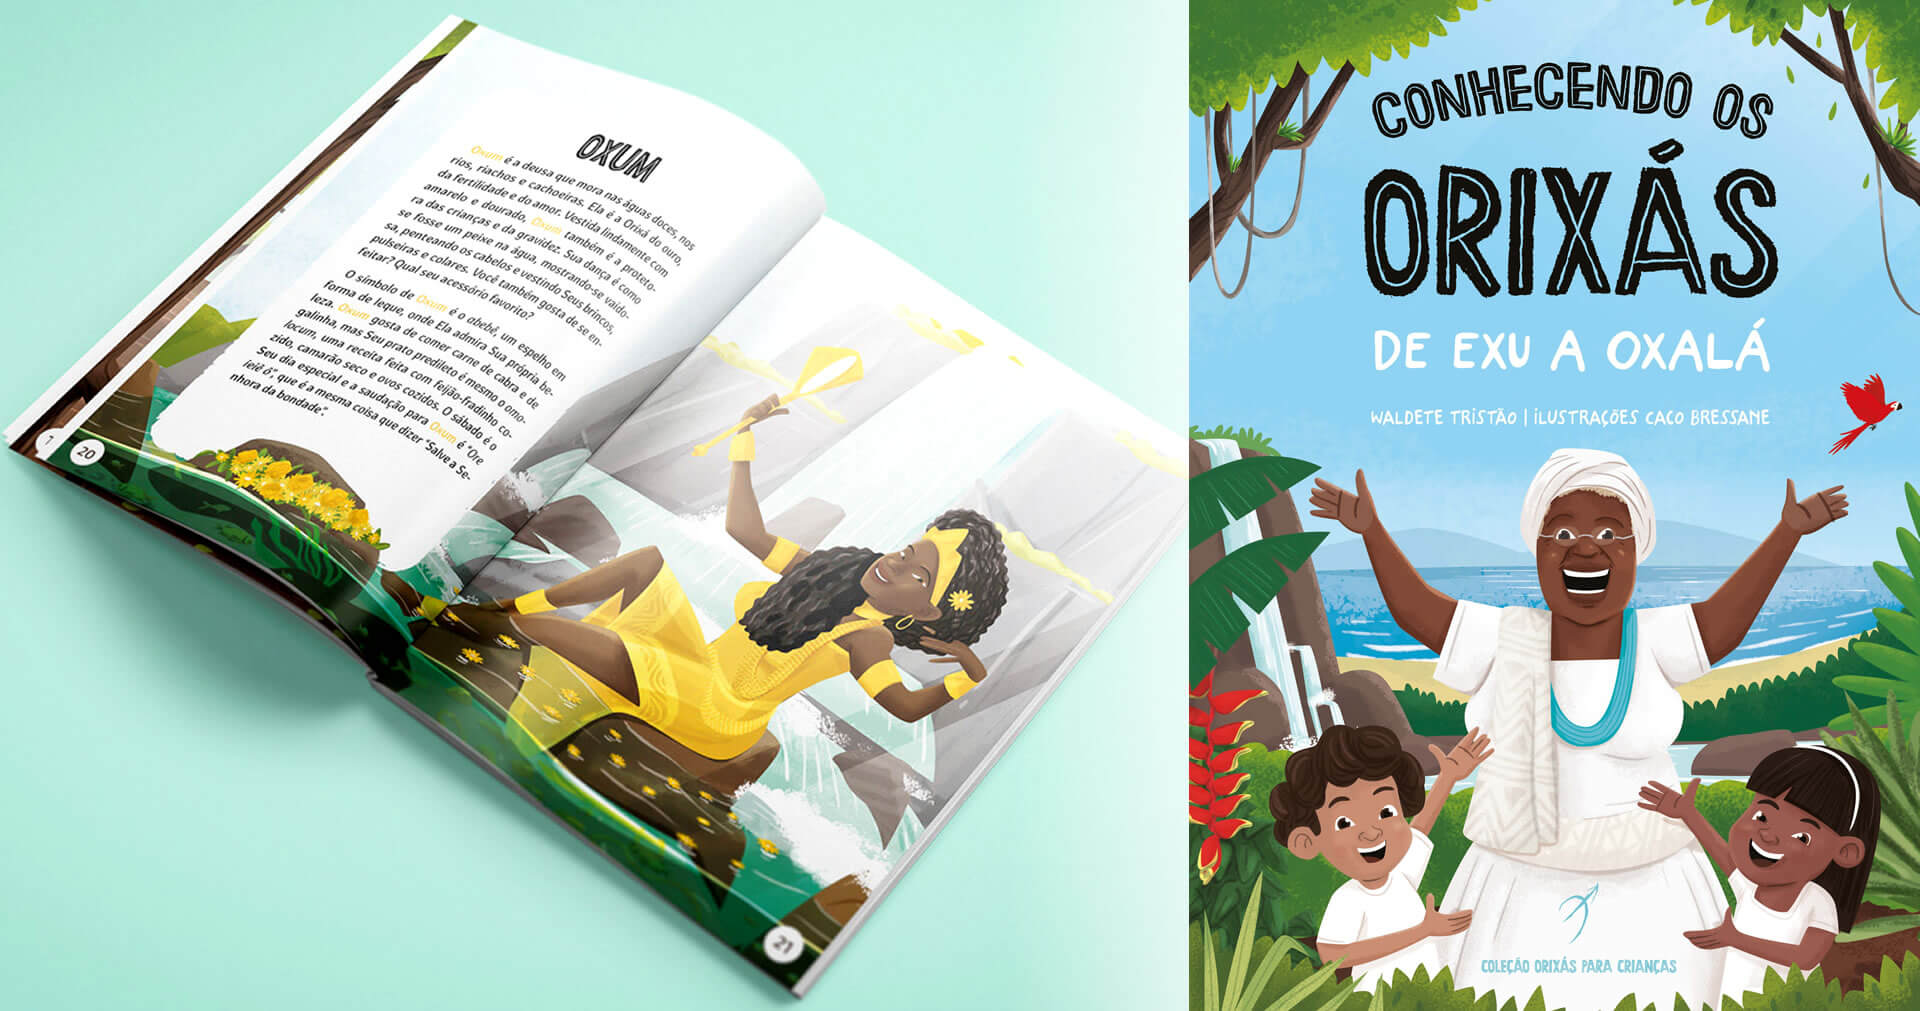 Arole Cultural | Written by Waldete Tristão, Knowing the Orixás is a glorious book intended to educate young people about the beauty of African spirituality.